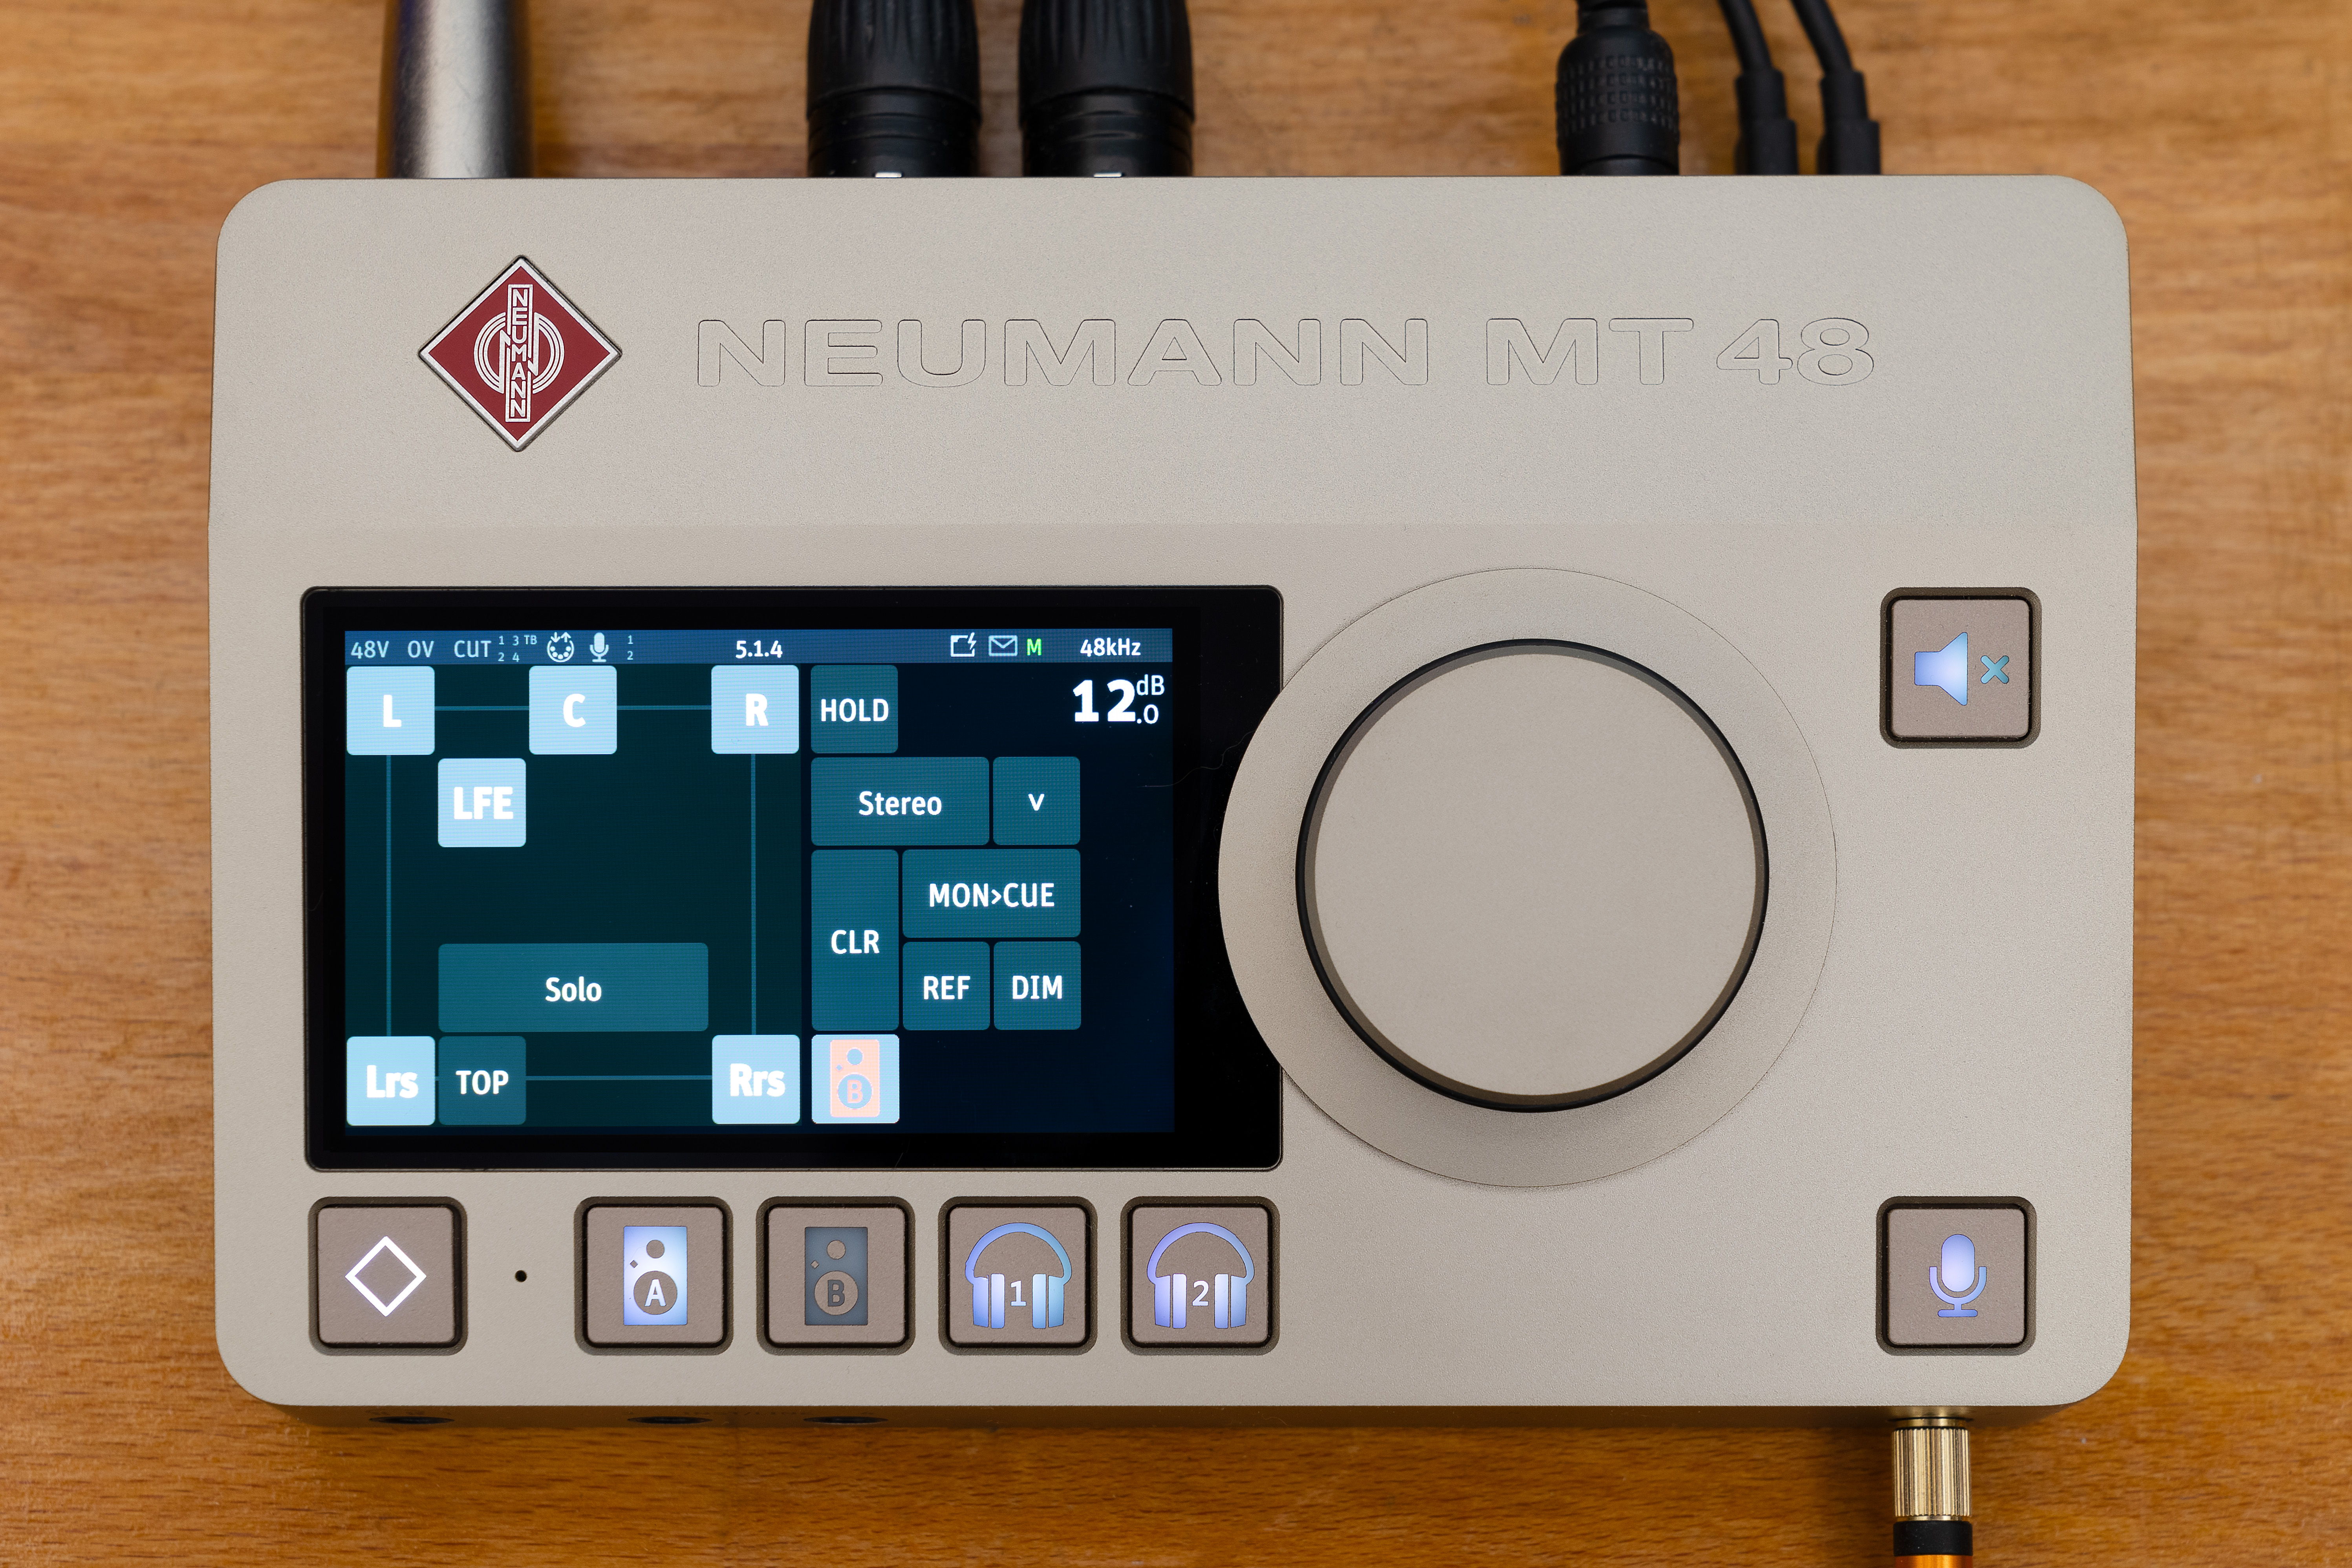 The Neumann MT 48 audio interface will receive a feature update, which will allow working in immersive audio formats